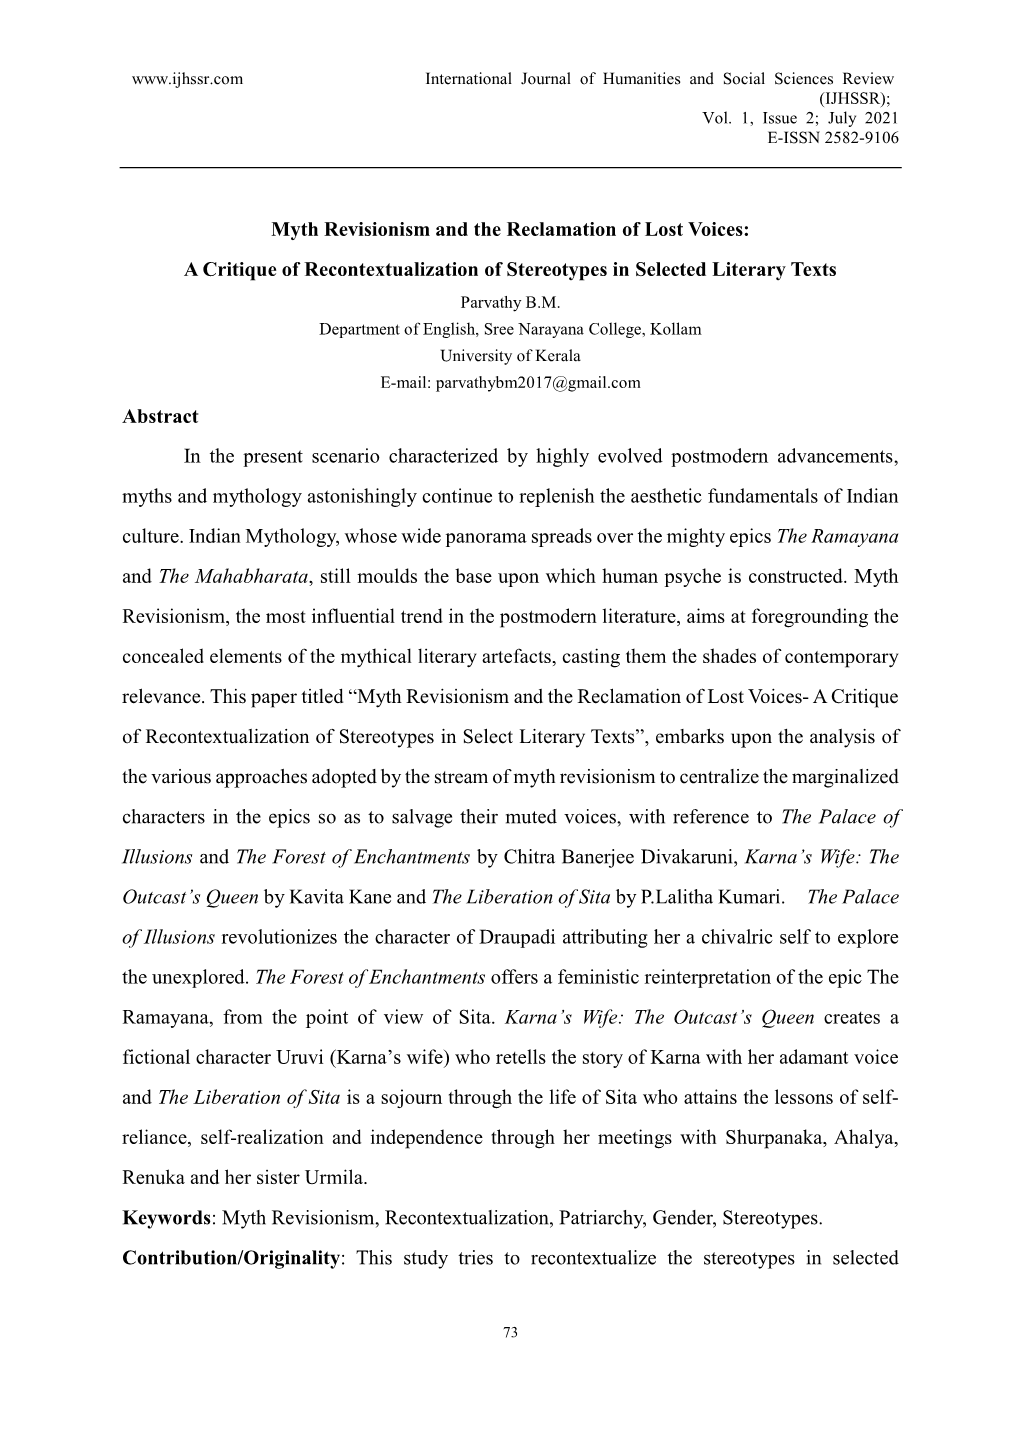 Myth Revisionism and the Reclamation of Lost Voices: a Critique of Recontextualization of Stereotypes in Selected Literary Texts Parvathy B.M